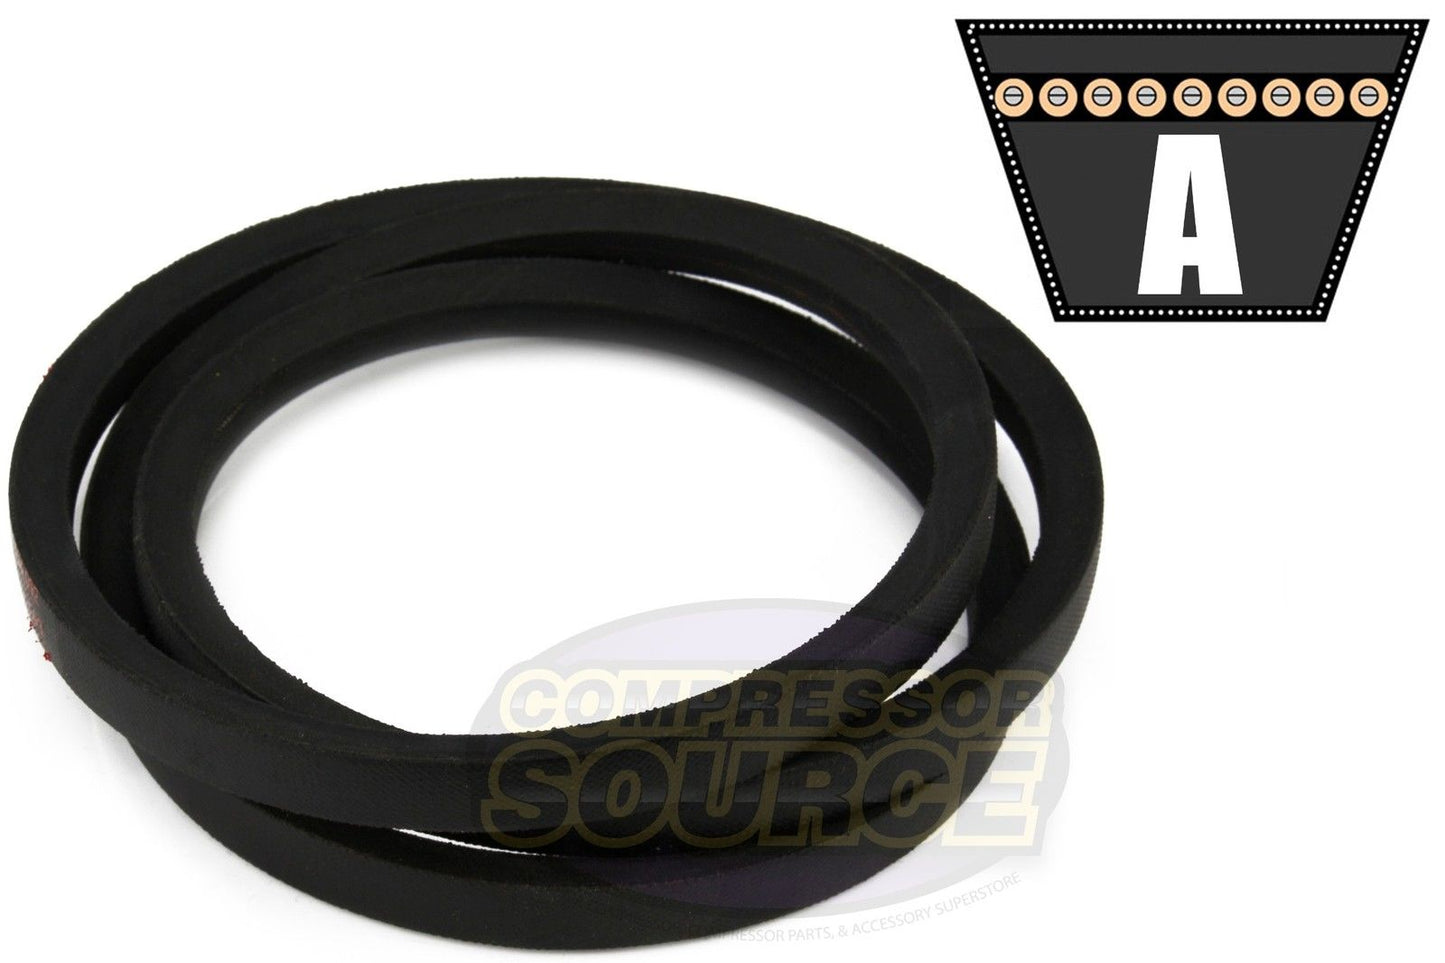 A73 1/2" x 75" V Belt 4L750 Replacement High Quality Industrial & Lawn Mower